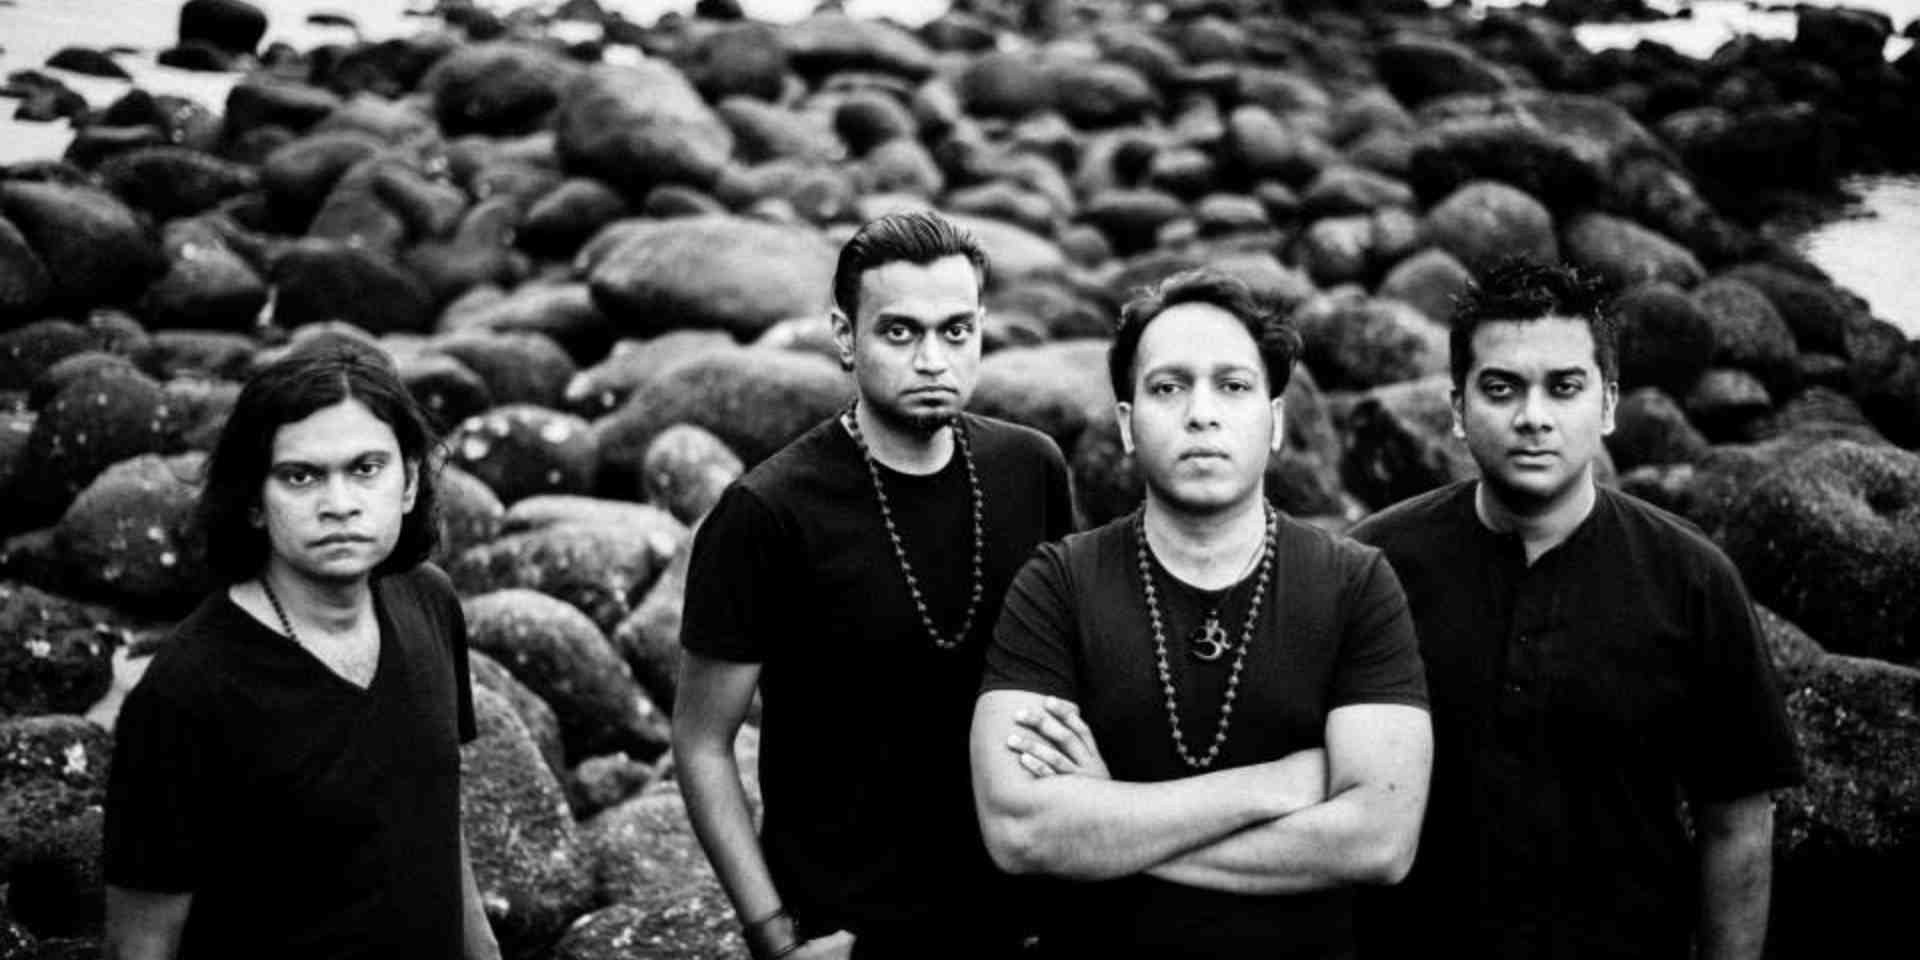 "We have just evolved the way we want to evolve": An interview with Rudra